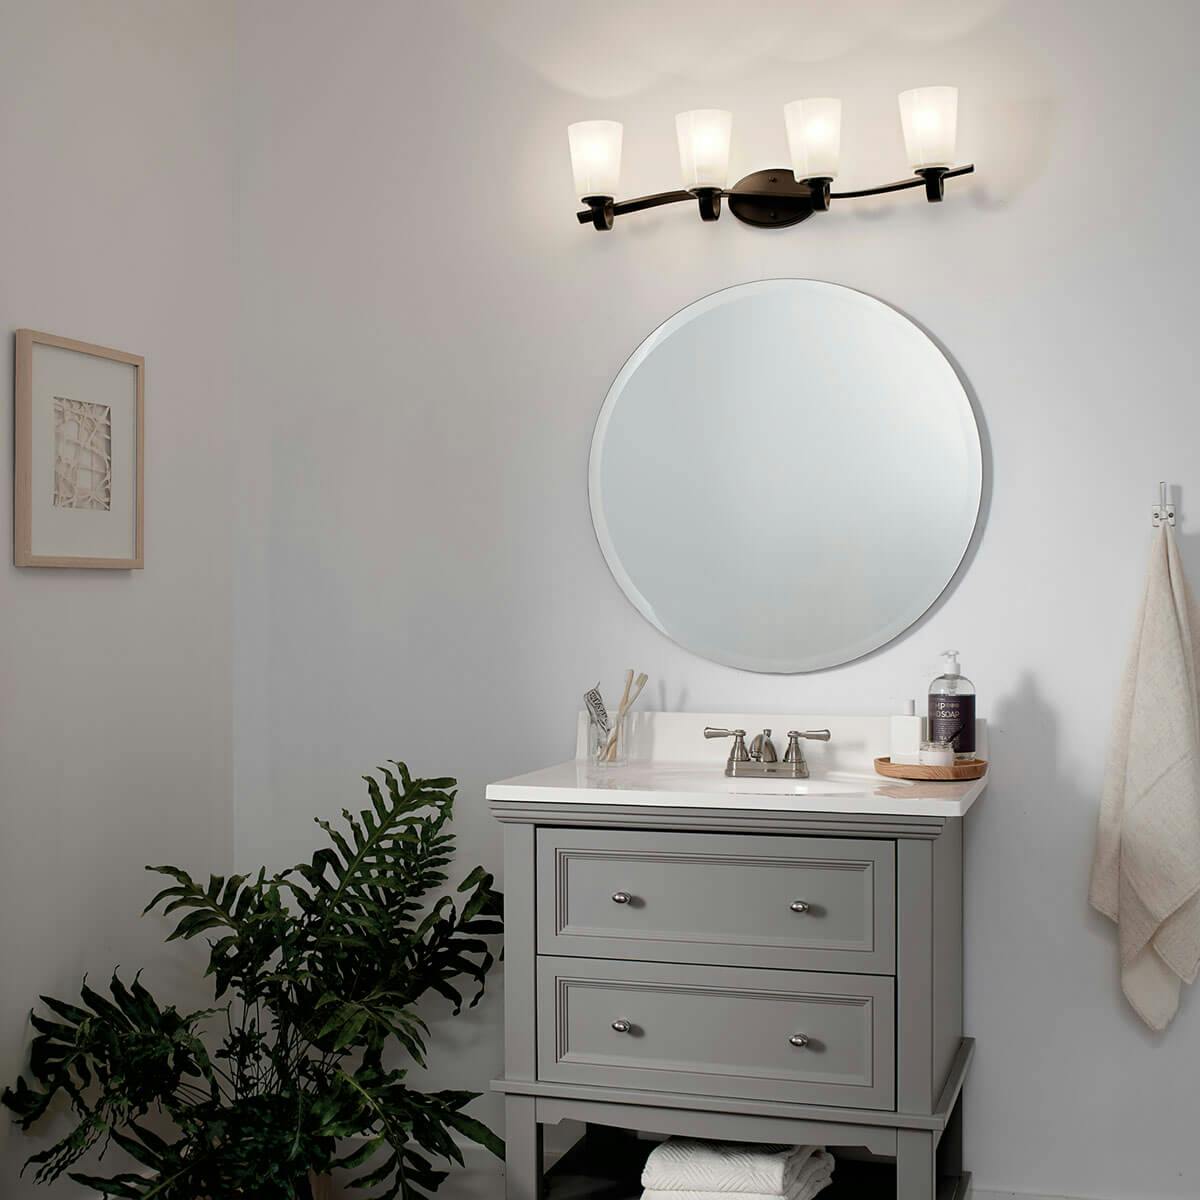 Day time Bathroom featuring Oxby vanity light 37520OZ